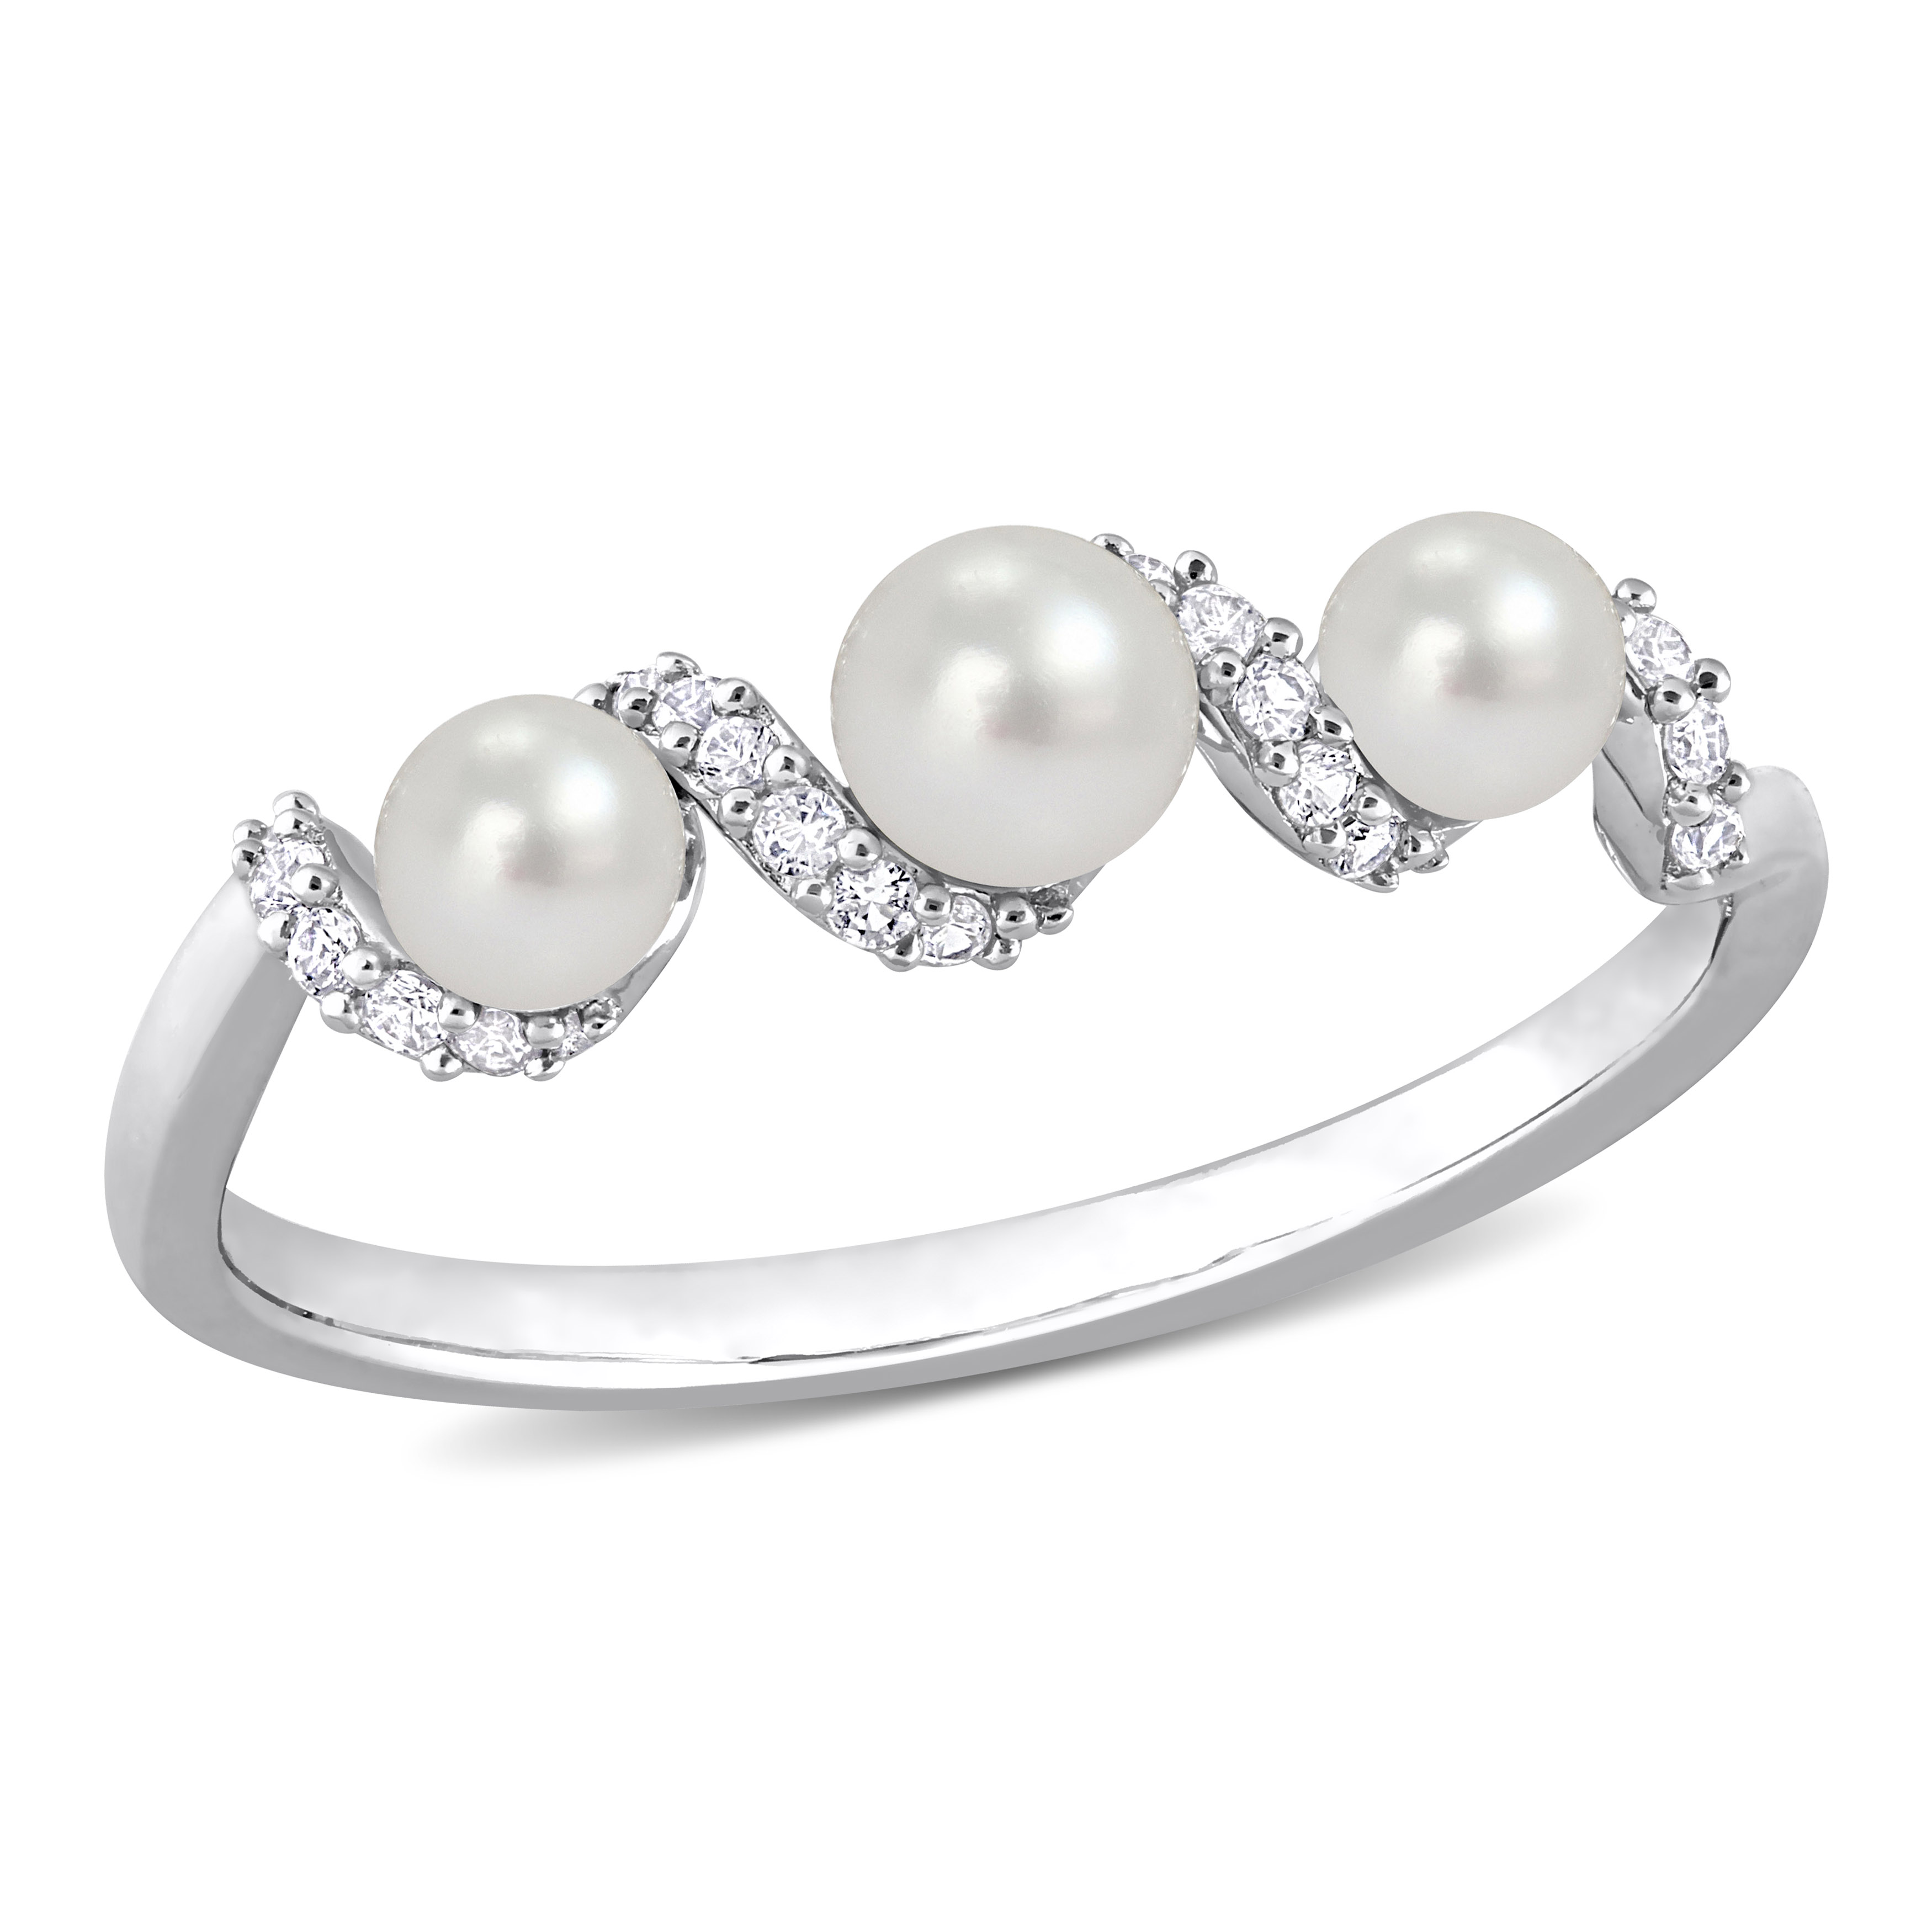 Cultured Freshwater Pearl and 1/4 CT TGW Created White SapphireSwirl Ring in Sterling Silver